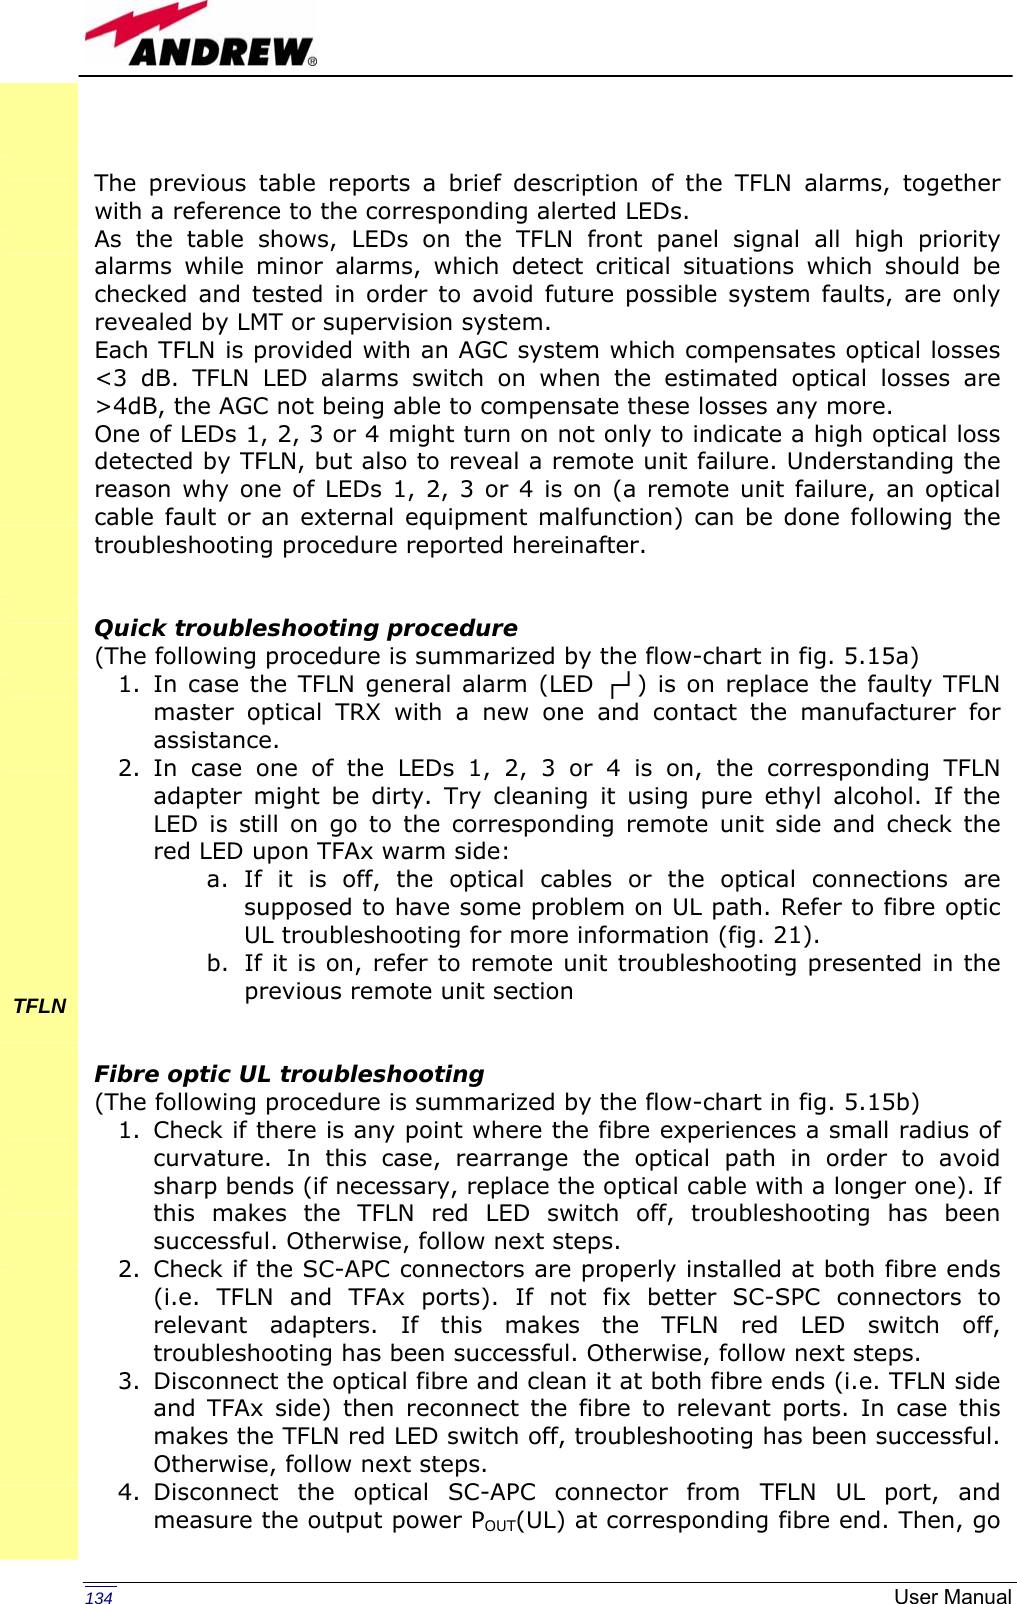   134  User Manual  The previous table reports a brief description of the TFLN alarms, together with a reference to the corresponding alerted LEDs. As the table shows, LEDs on the TFLN front panel signal all high priority alarms while minor alarms, which detect critical situations which should be checked and tested in order to avoid future possible system faults, are only revealed by LMT or supervision system. Each TFLN is provided with an AGC system which compensates optical losses &lt;3 dB. TFLN LED alarms switch on when the estimated optical losses are &gt;4dB, the AGC not being able to compensate these losses any more. One of LEDs 1, 2, 3 or 4 might turn on not only to indicate a high optical loss detected by TFLN, but also to reveal a remote unit failure. Understanding the reason why one of LEDs 1, 2, 3 or 4 is on (a remote unit failure, an optical cable fault or an external equipment malfunction) can be done following the troubleshooting procedure reported hereinafter.   Quick troubleshooting procedure (The following procedure is summarized by the flow-chart in fig. 5.15a) 1. In case the TFLN general alarm (LED ┌┘) is on replace the faulty TFLN master optical TRX with a new one and contact the manufacturer for assistance. 2. In case one of the LEDs 1, 2, 3 or 4 is on, the corresponding TFLN adapter might be dirty. Try cleaning it using pure ethyl alcohol. If the LED is still on go to the corresponding remote unit side and check the red LED upon TFAx warm side: a. If it is off, the optical cables or the optical connections are supposed to have some problem on UL path. Refer to fibre optic UL troubleshooting for more information (fig. 21). b. If it is on, refer to remote unit troubleshooting presented in the previous remote unit section   Fibre optic UL troubleshooting (The following procedure is summarized by the flow-chart in fig. 5.15b) 1. Check if there is any point where the fibre experiences a small radius of curvature. In this case, rearrange the optical path in order to avoid sharp bends (if necessary, replace the optical cable with a longer one). If this makes the TFLN red LED switch off, troubleshooting has been successful. Otherwise, follow next steps. 2. Check if the SC-APC connectors are properly installed at both fibre ends (i.e. TFLN and TFAx ports). If not fix better SC-SPC connectors to relevant adapters. If this makes the TFLN red LED switch off, troubleshooting has been successful. Otherwise, follow next steps. 3. Disconnect the optical fibre and clean it at both fibre ends (i.e. TFLN side and TFAx side) then reconnect the fibre to relevant ports. In case this makes the TFLN red LED switch off, troubleshooting has been successful. Otherwise, follow next steps. 4. Disconnect the optical SC-APC connector from TFLN UL port, and measure the output power POUT(UL) at corresponding fibre end. Then, go             TFLN        